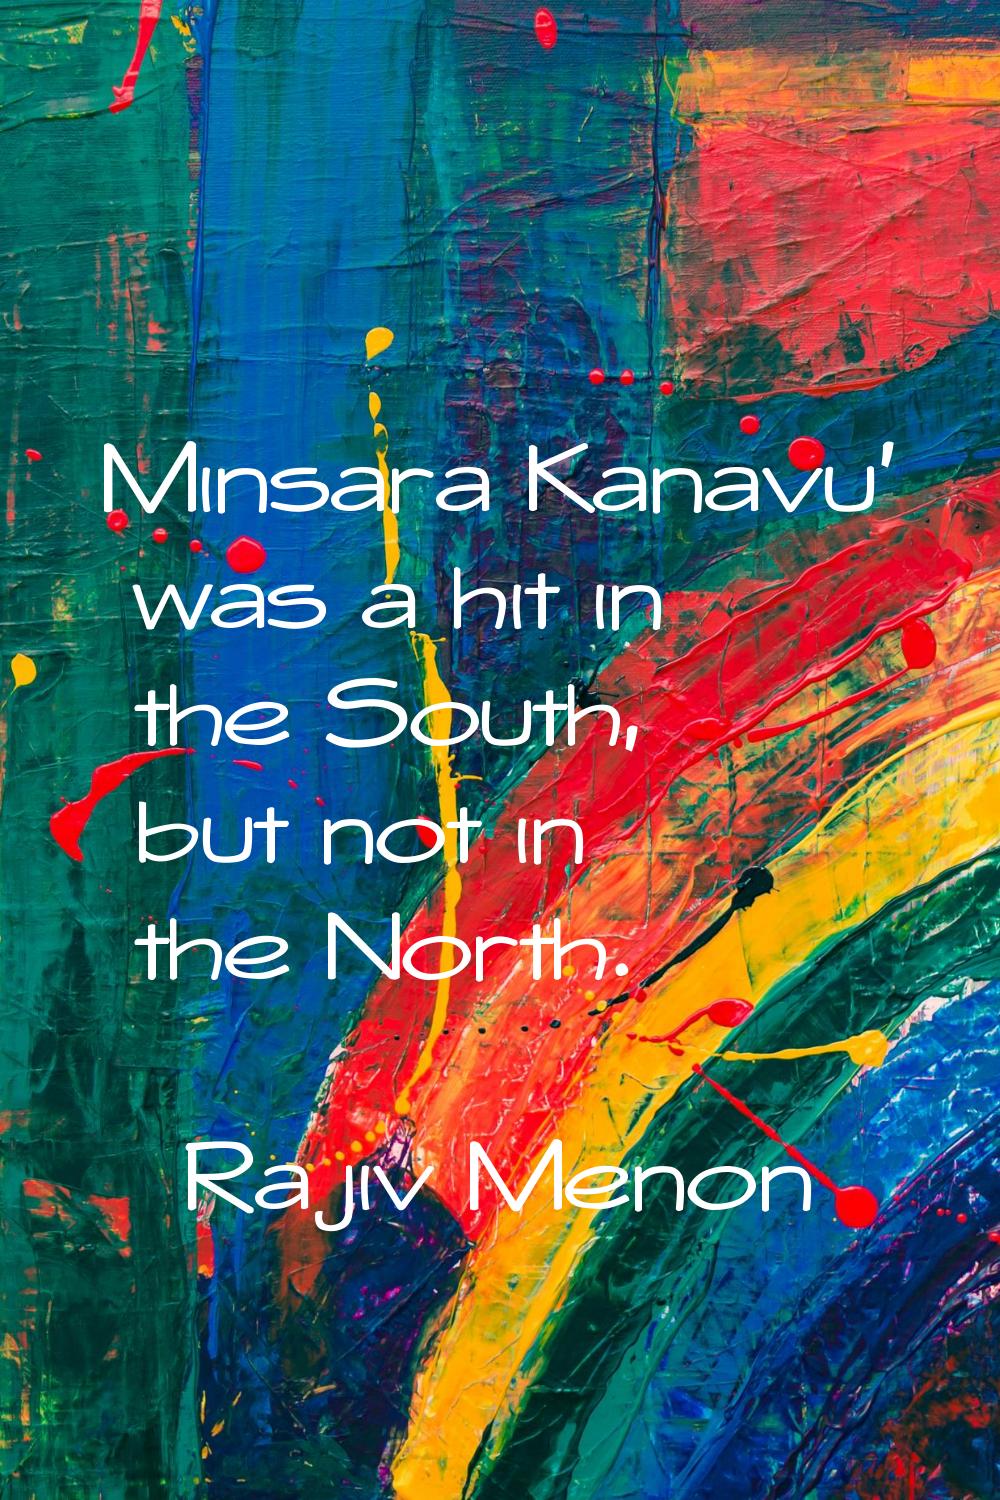 Minsara Kanavu' was a hit in the South, but not in the North.